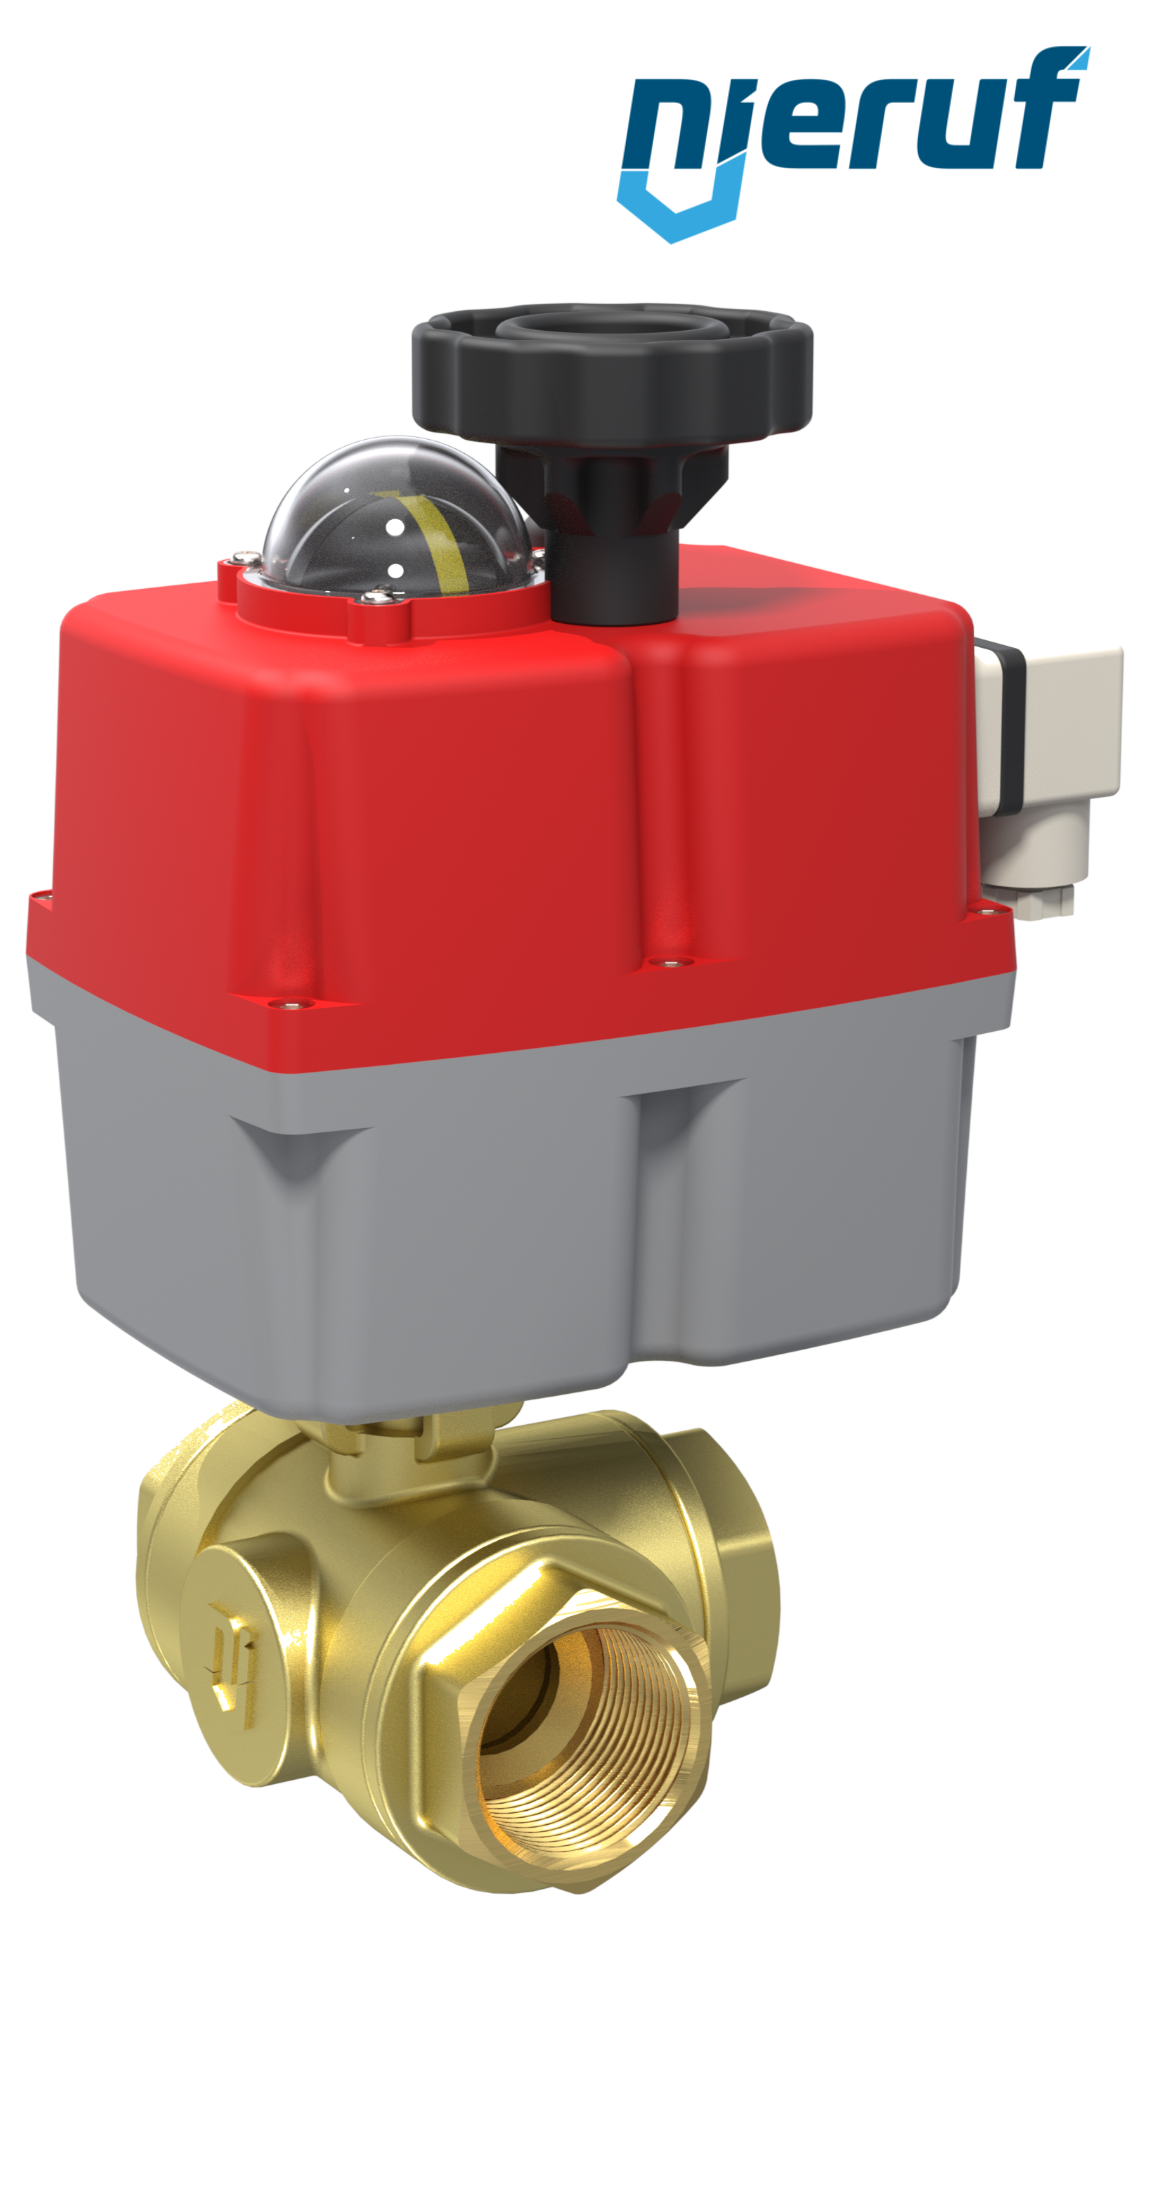 3 way automatic-ball valve 24-240V DN50 - 2" inch brass full port design with L drilling